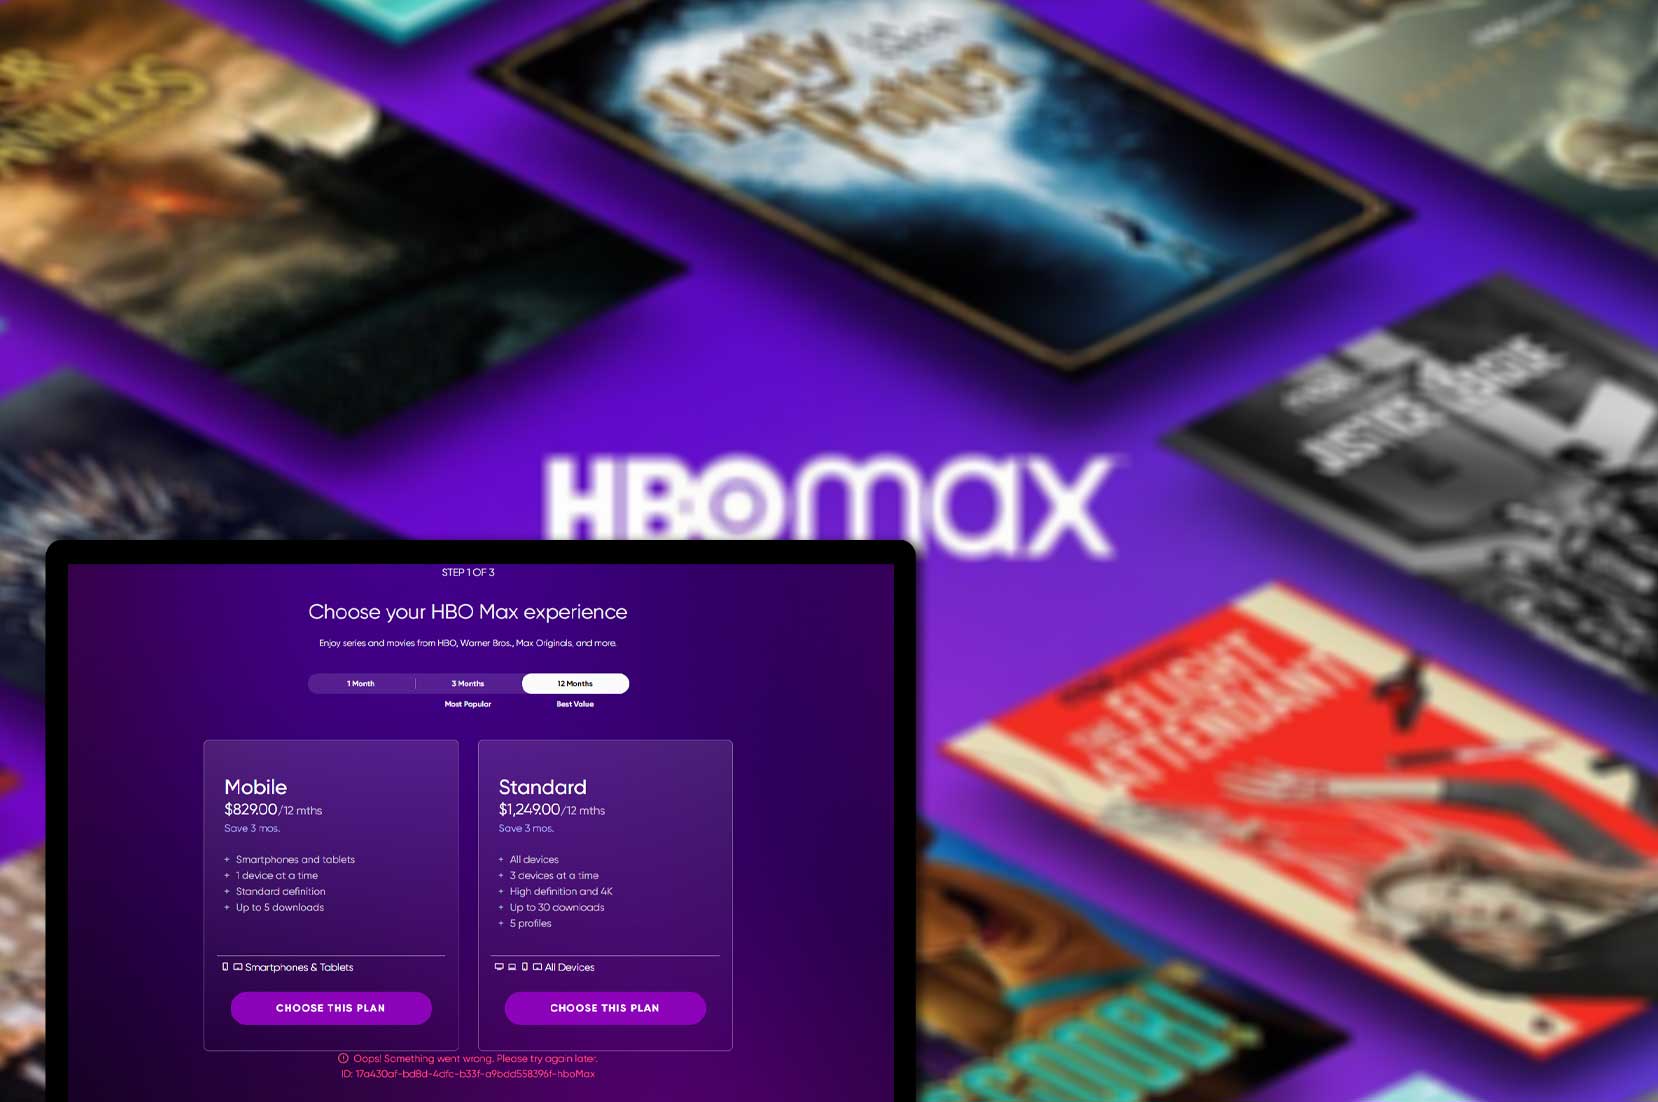 Extract-Buying-and-Rental-Options-of-Chosen-Streaming-HBO-Now-Movies